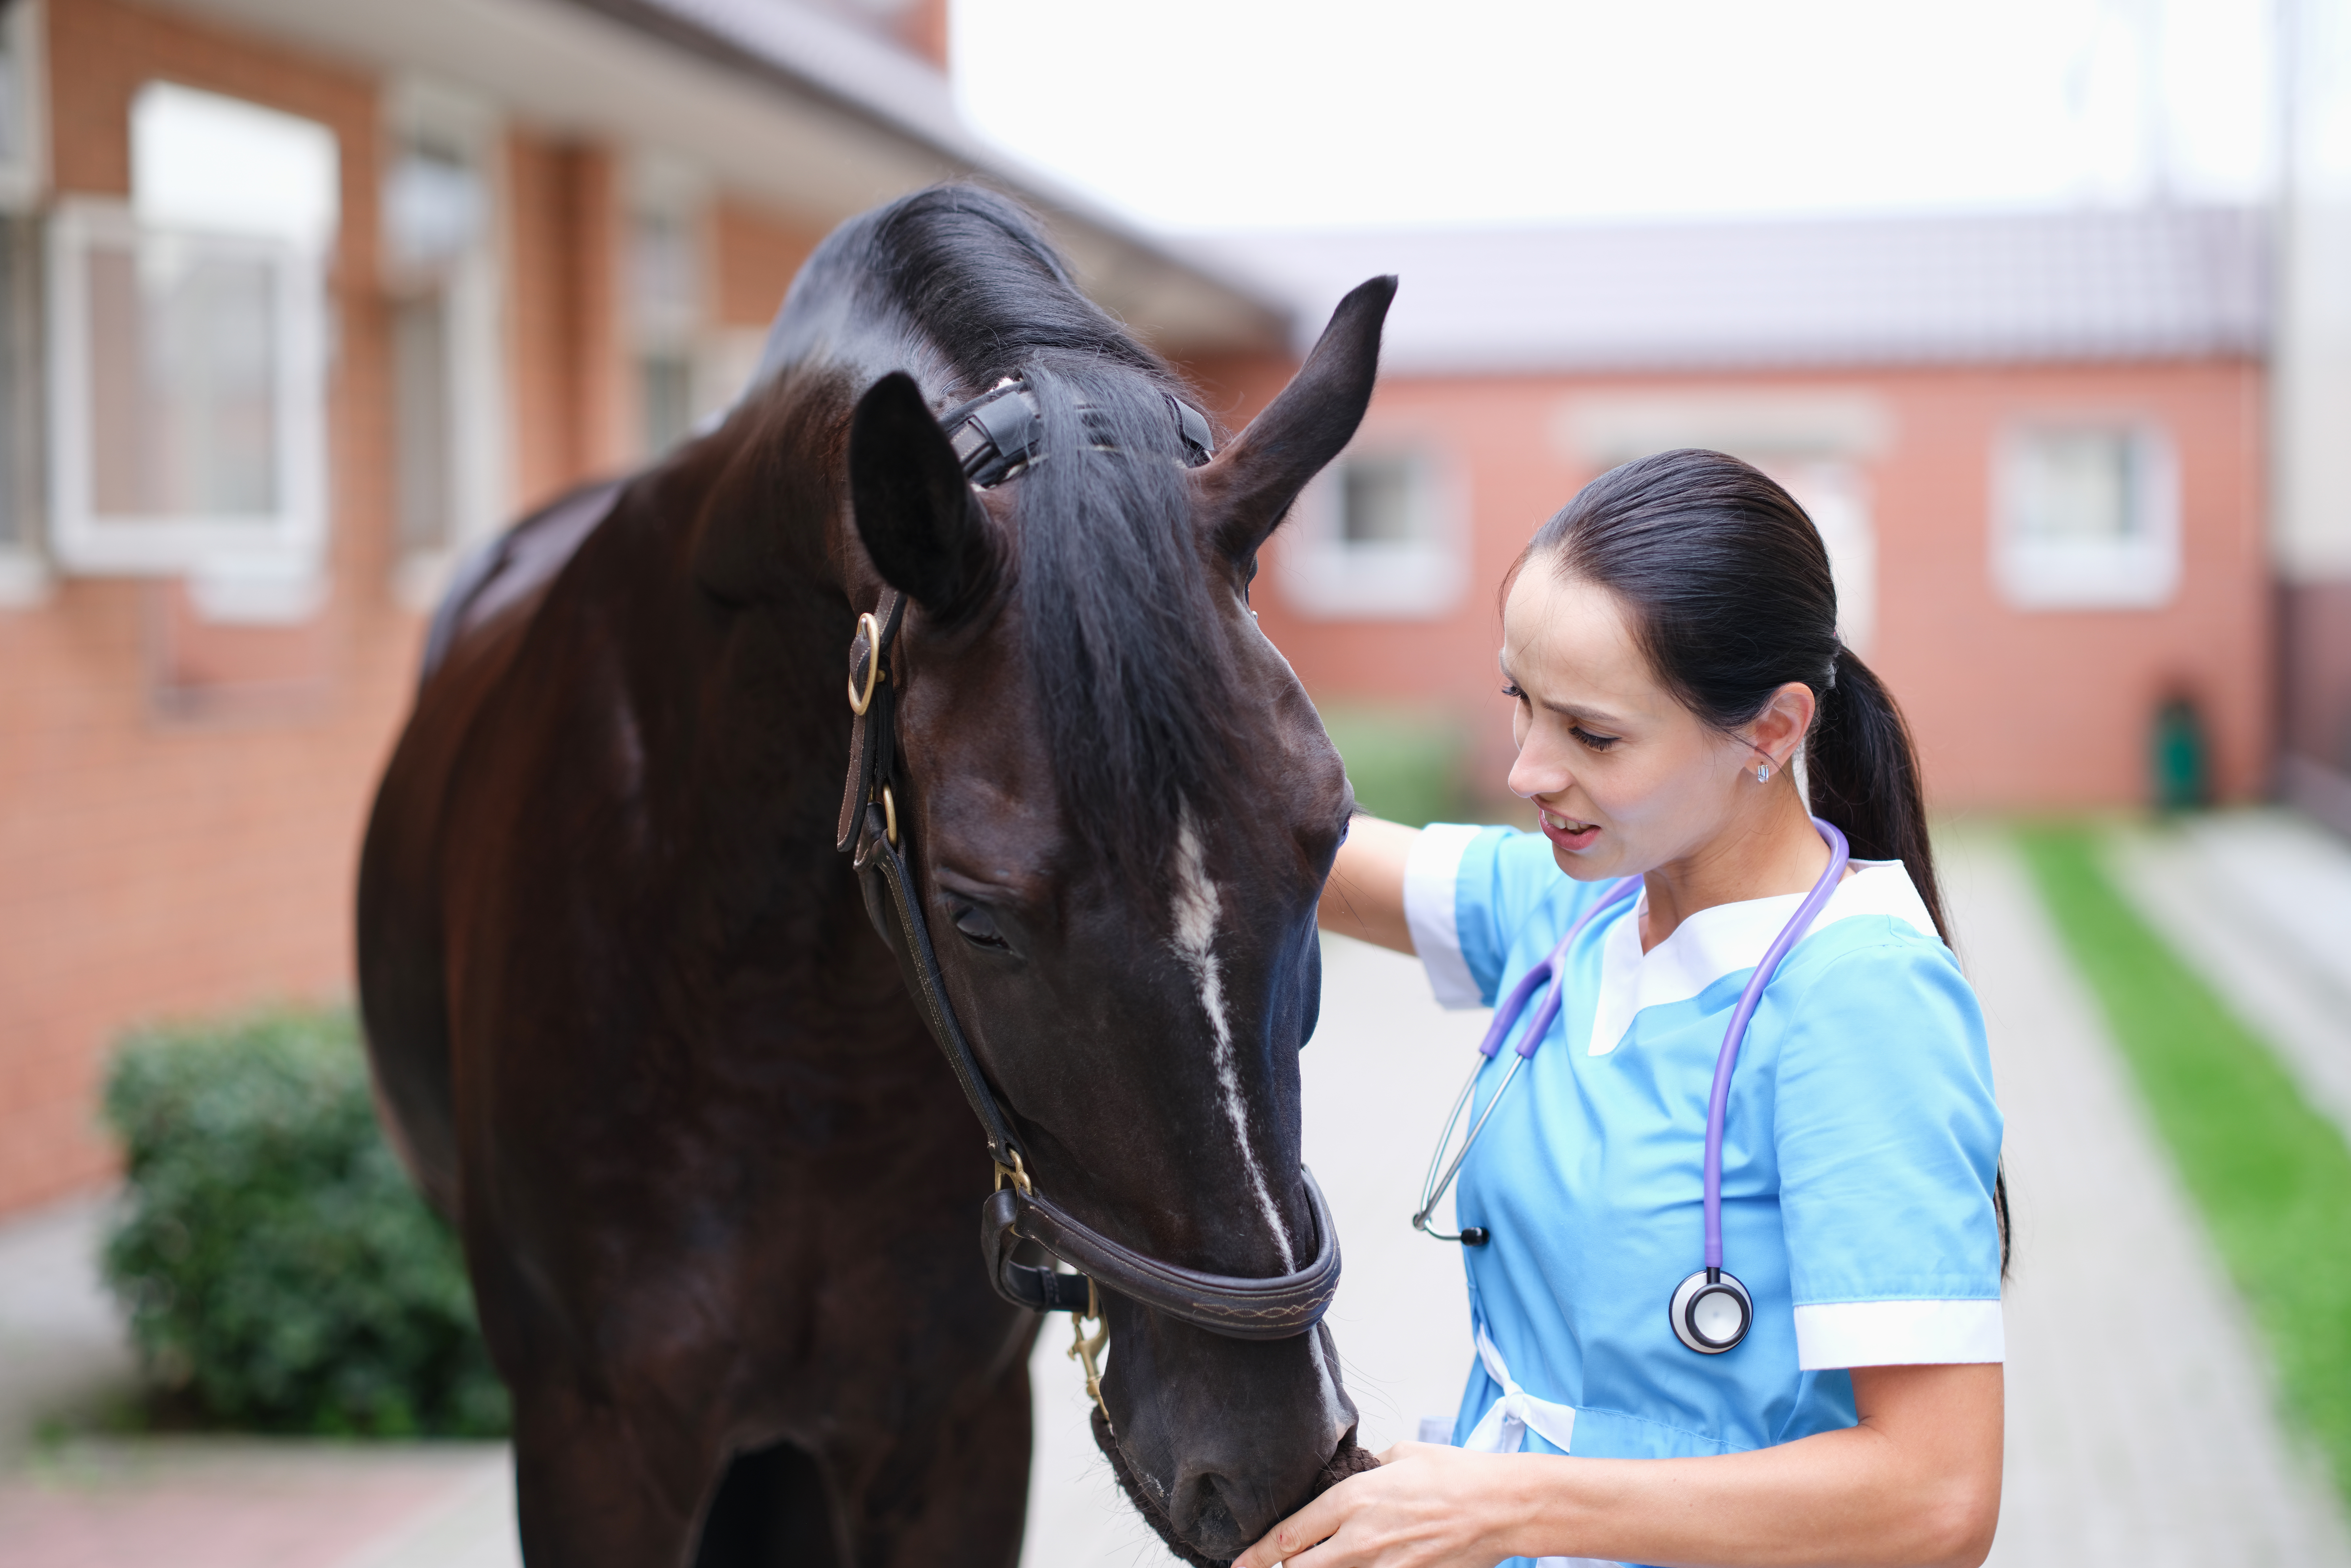 Horse being treated by a veterinarian